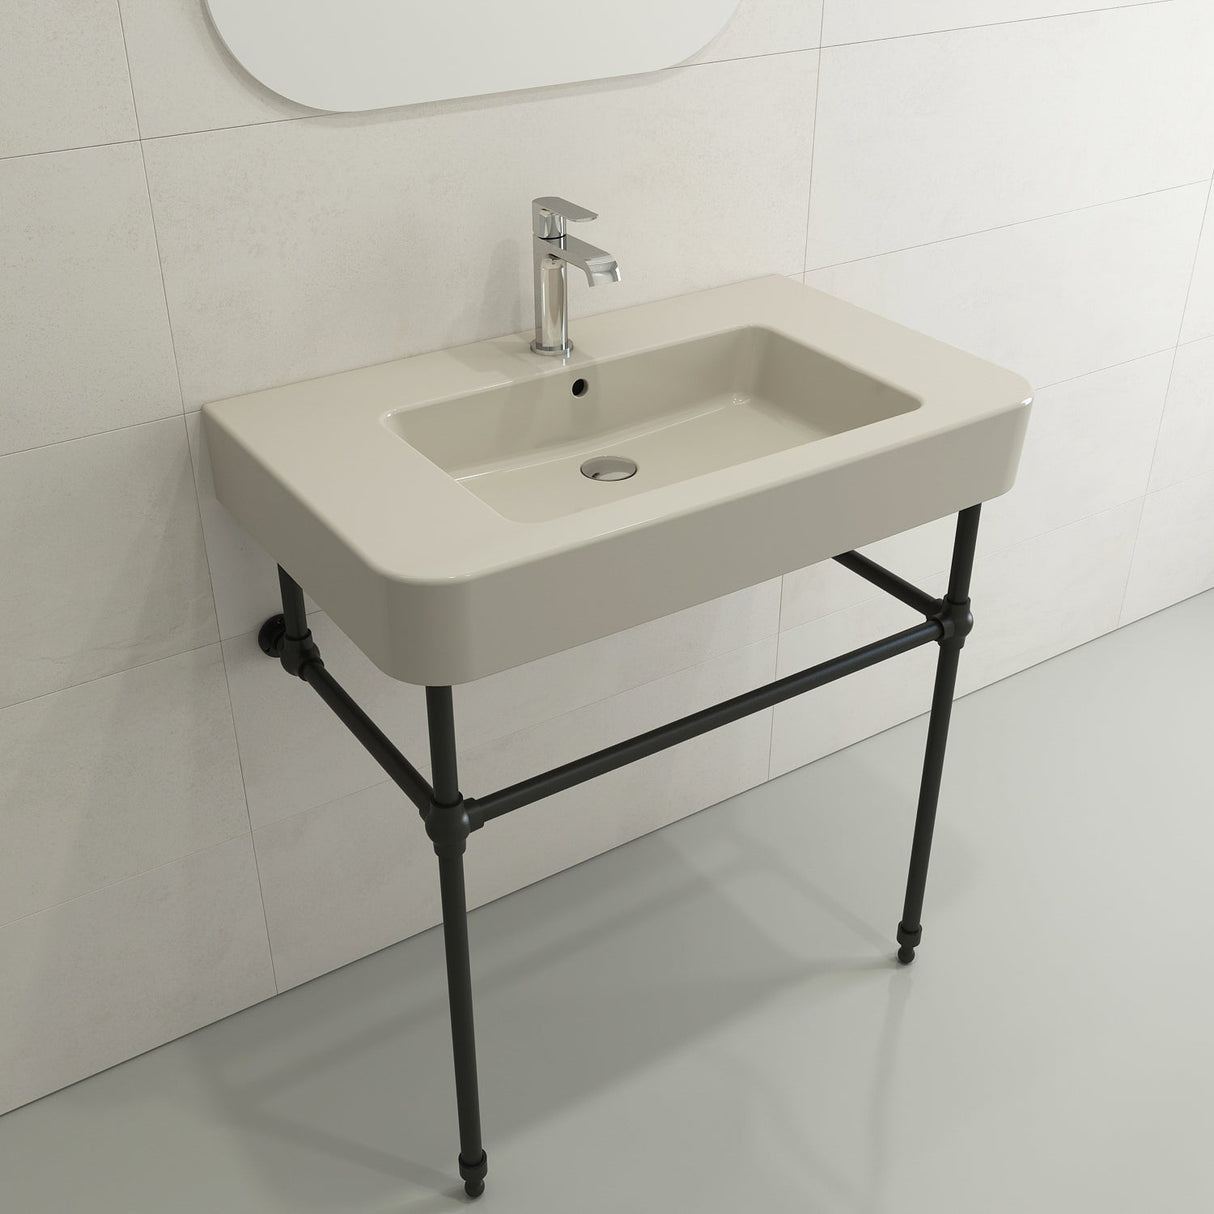 BOCCHI 1124-014-0126 Parma Wall-Mounted Sink Fireclay 33.5 in. 1-Hole with Overflow in Biscuit